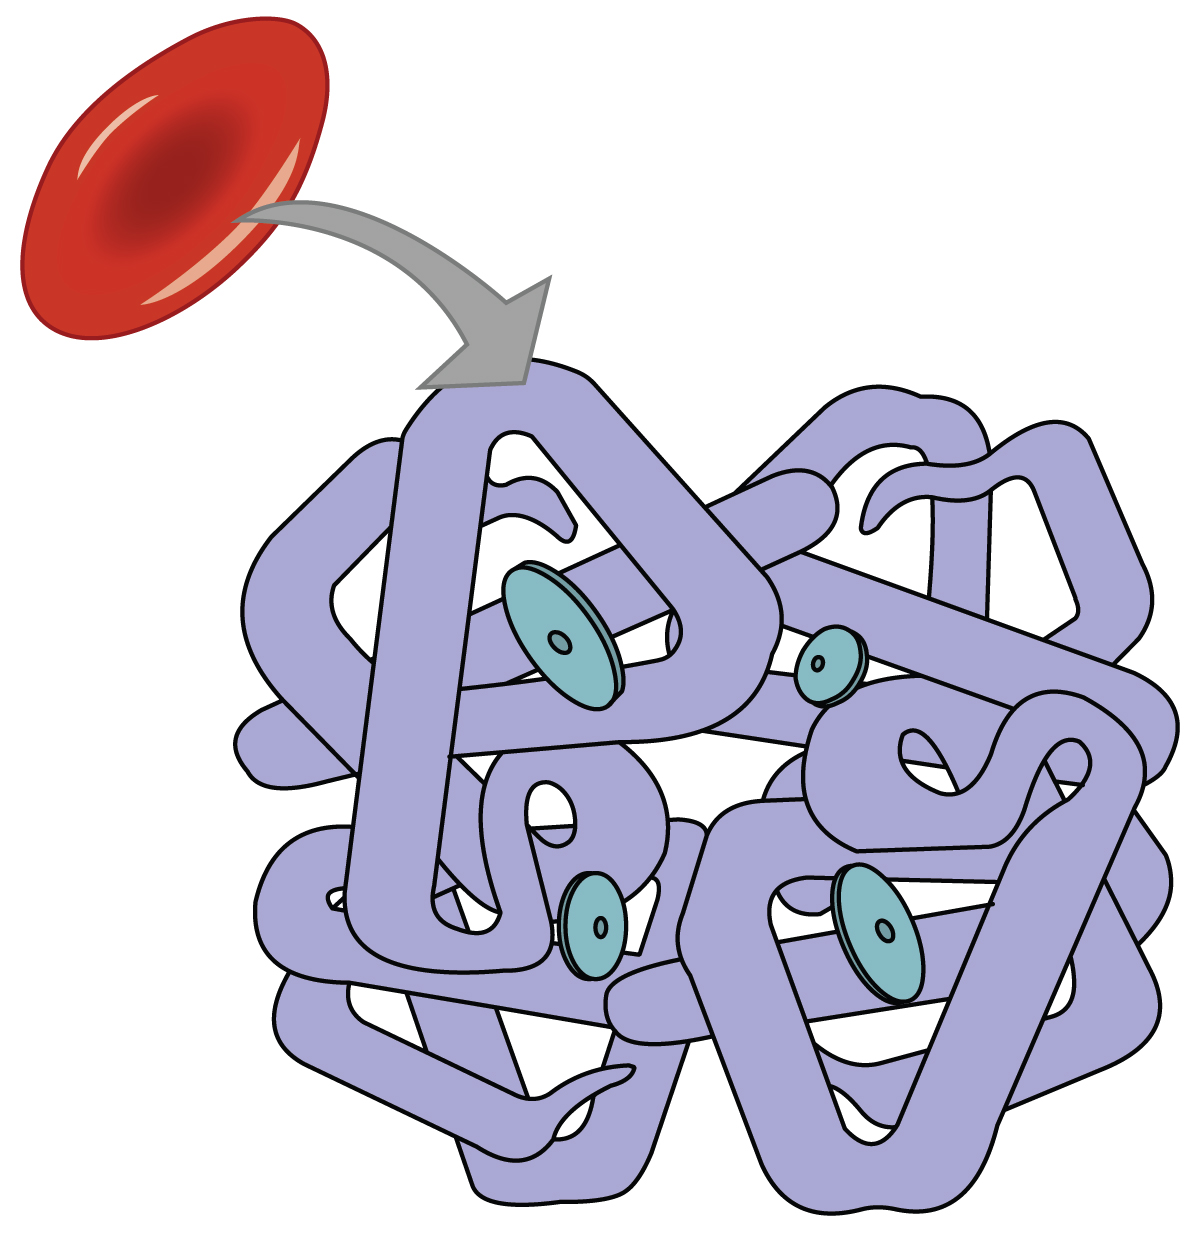 Red Blood Cell Diagram - ClipArt Best